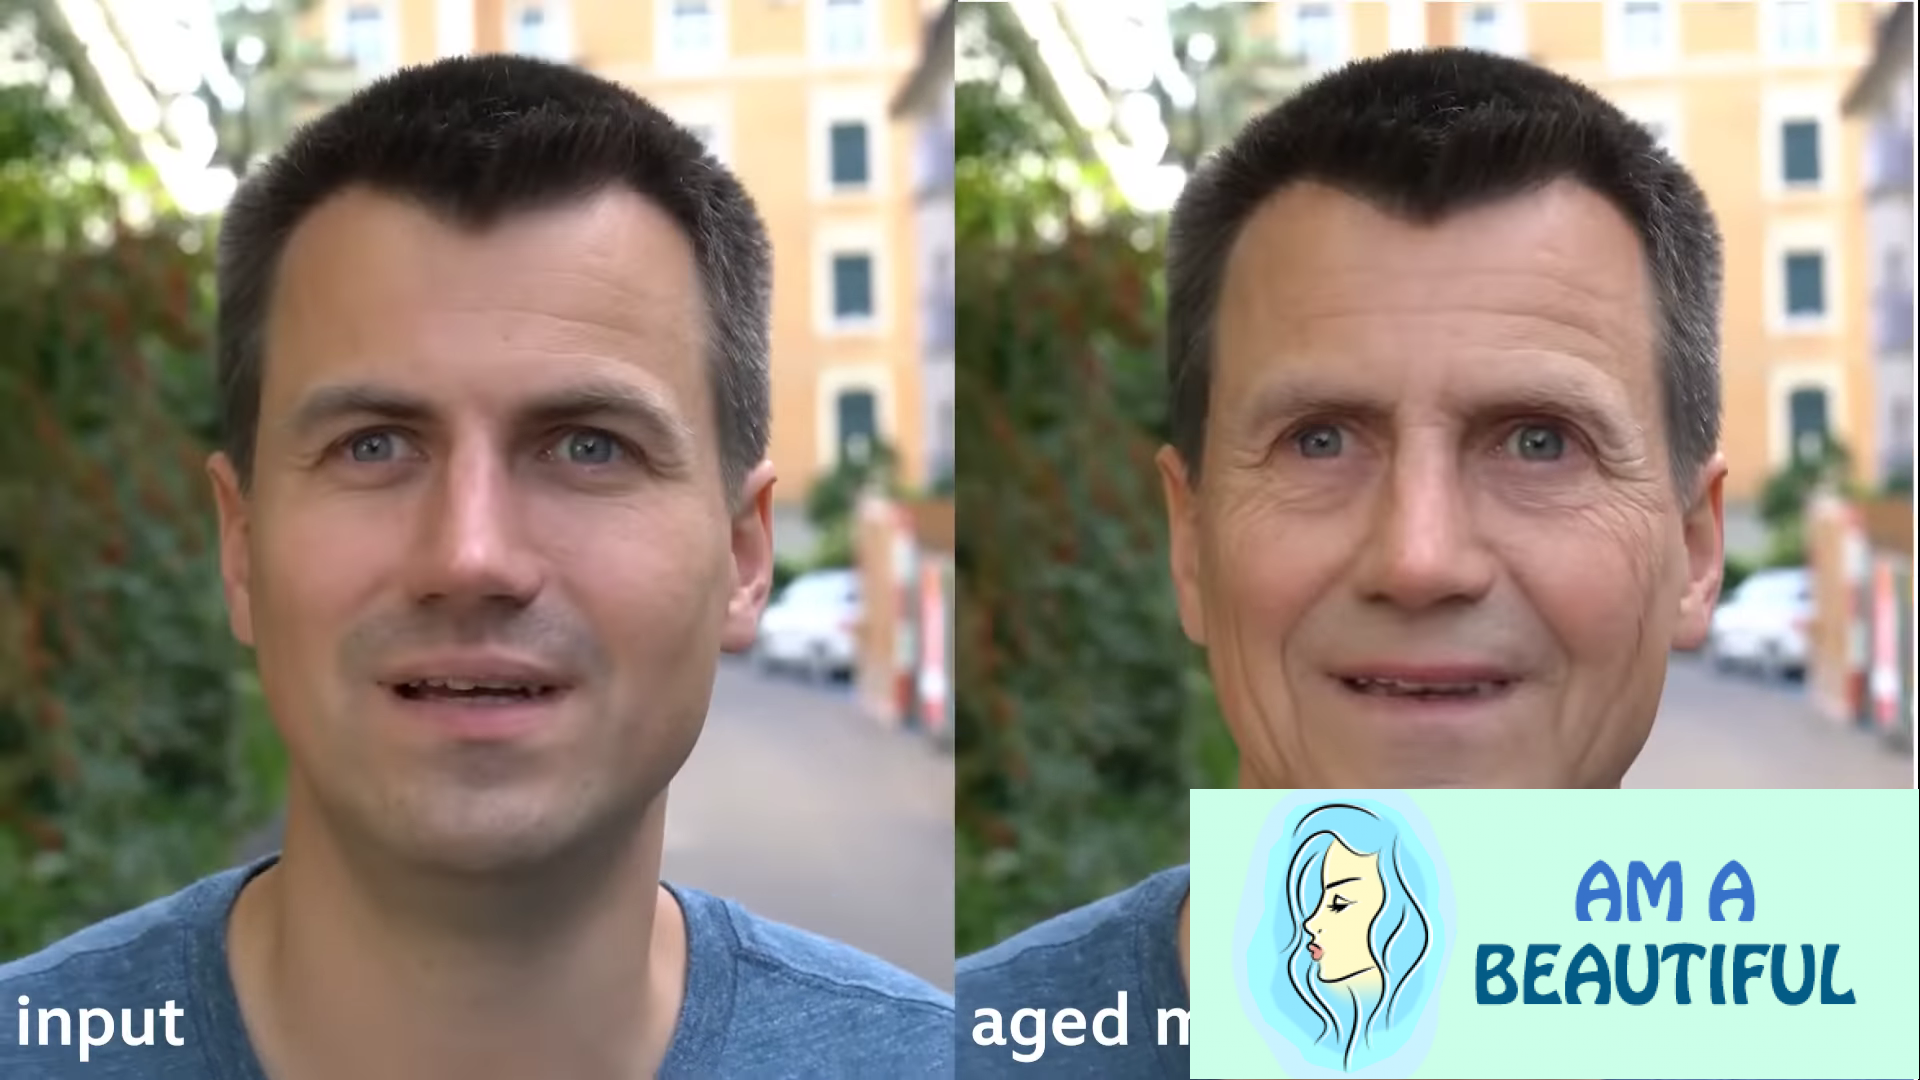 Disney built an AI that can easily make actors look younger or older